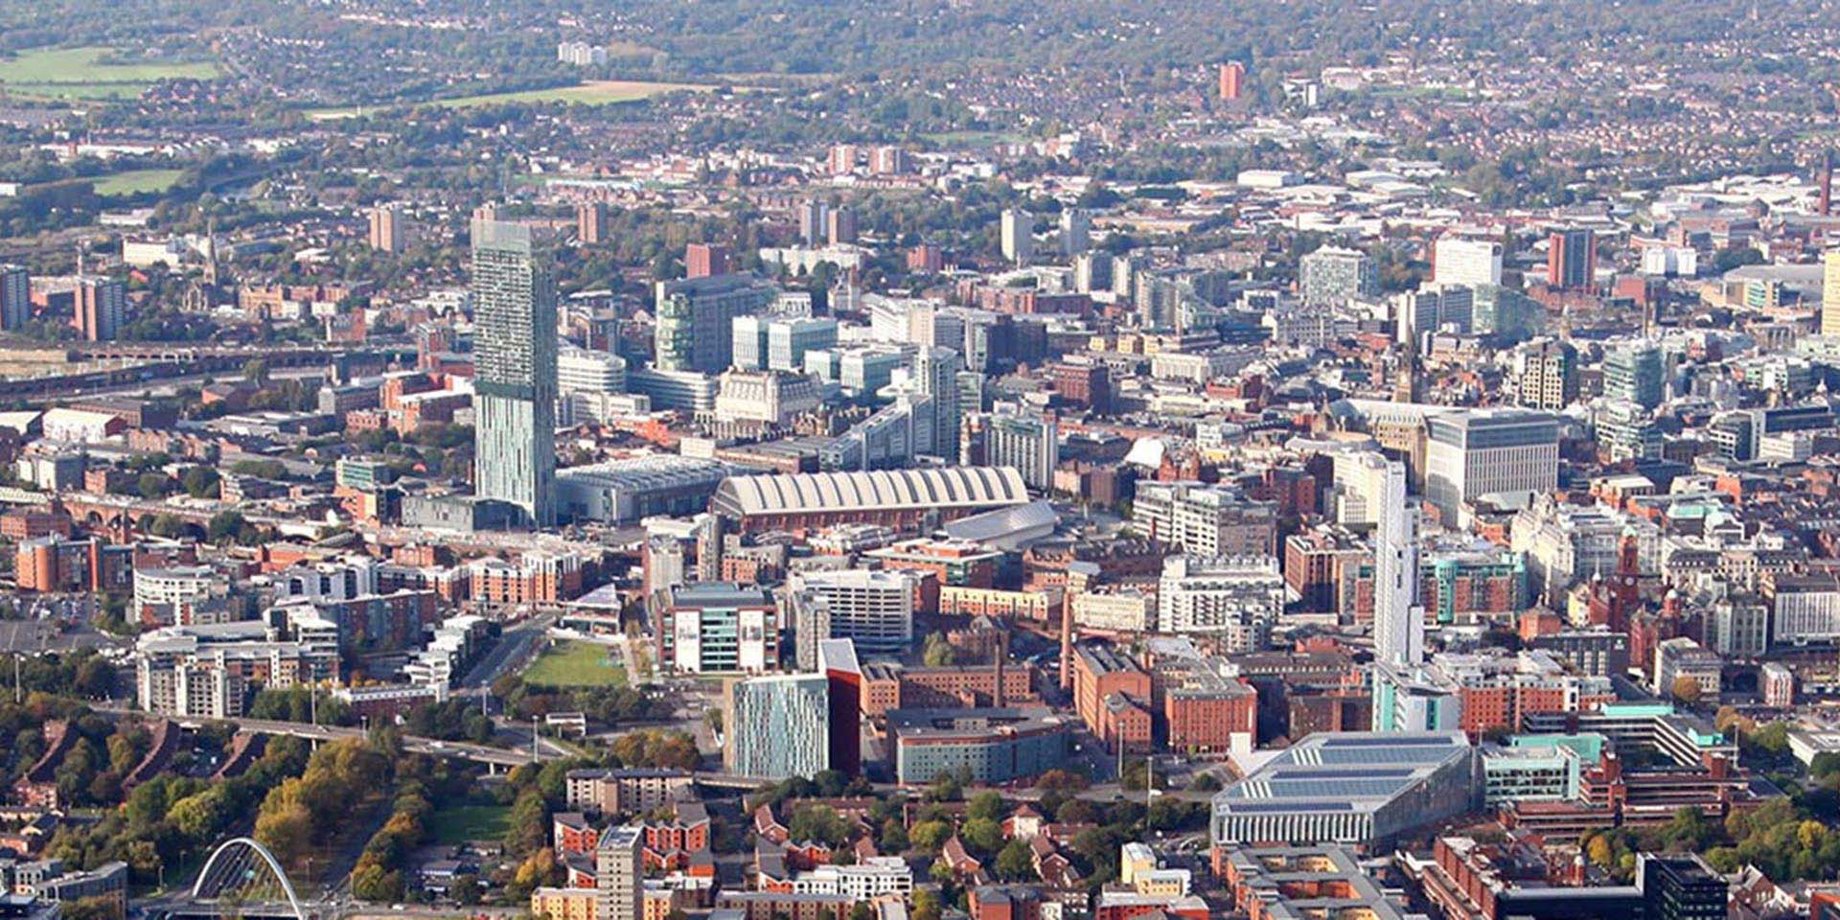 Innovation districts in the UK